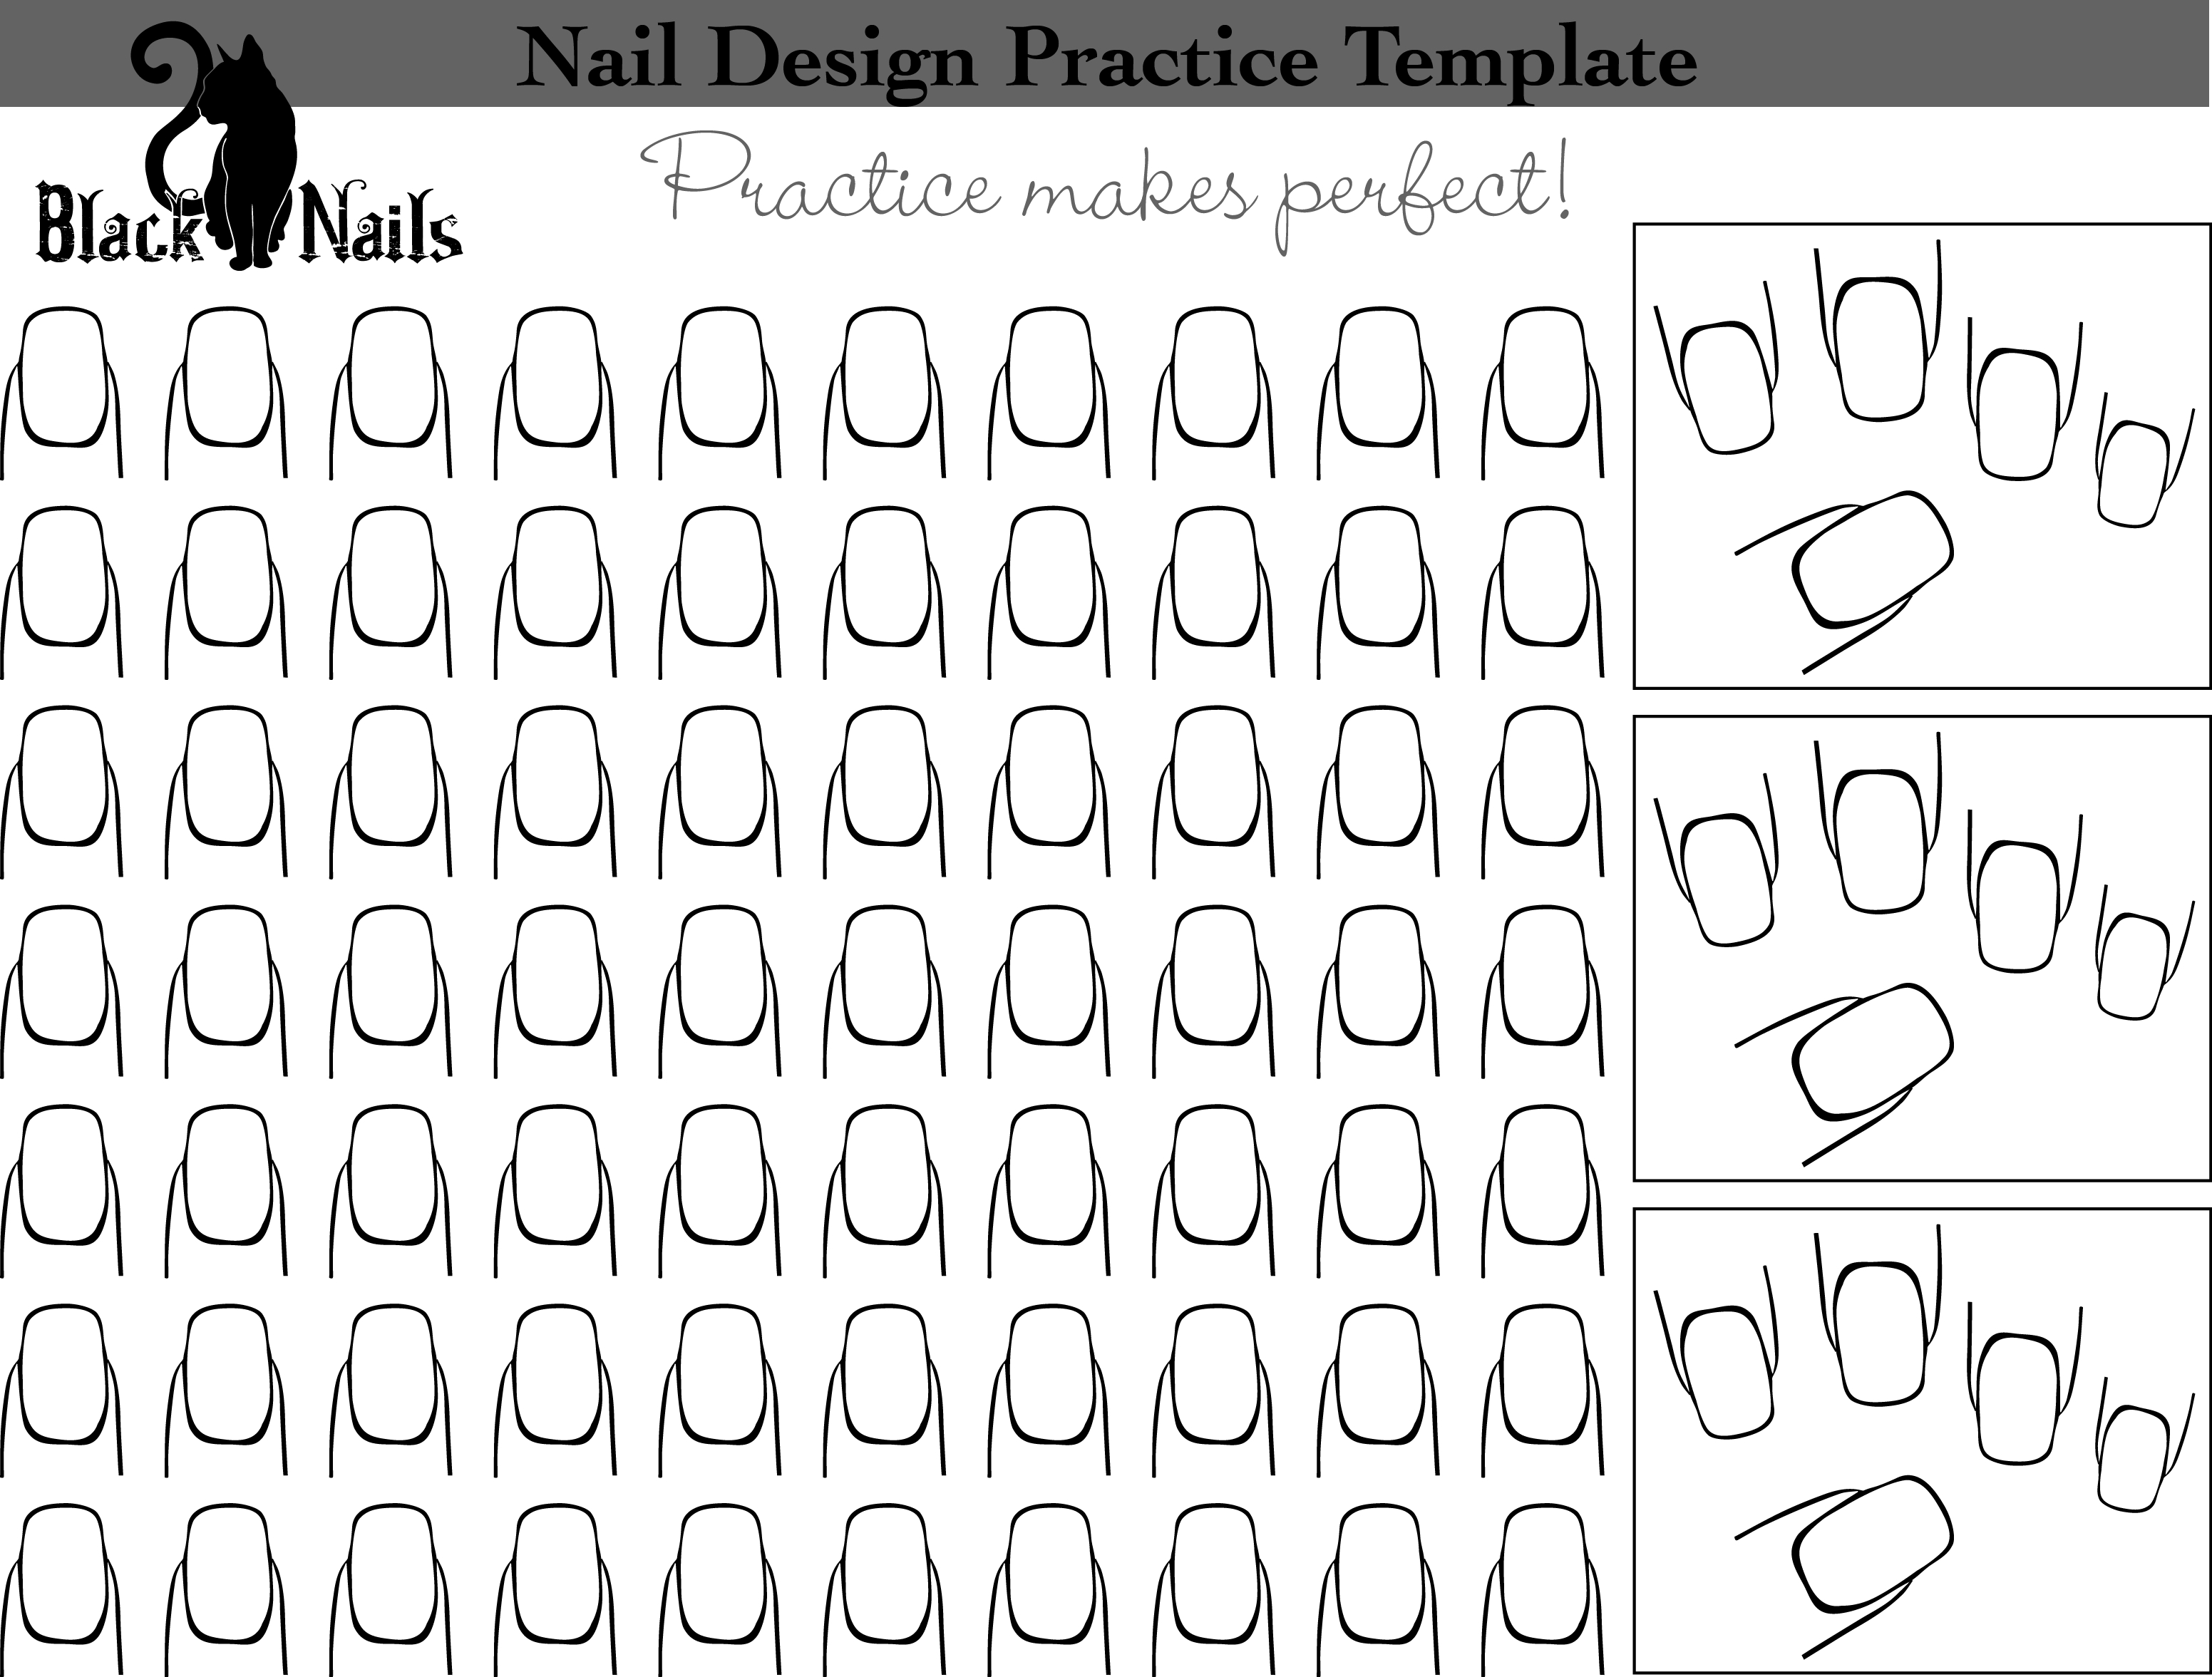 3. Top 10 Nail Art Designs for Beginners - wide 6